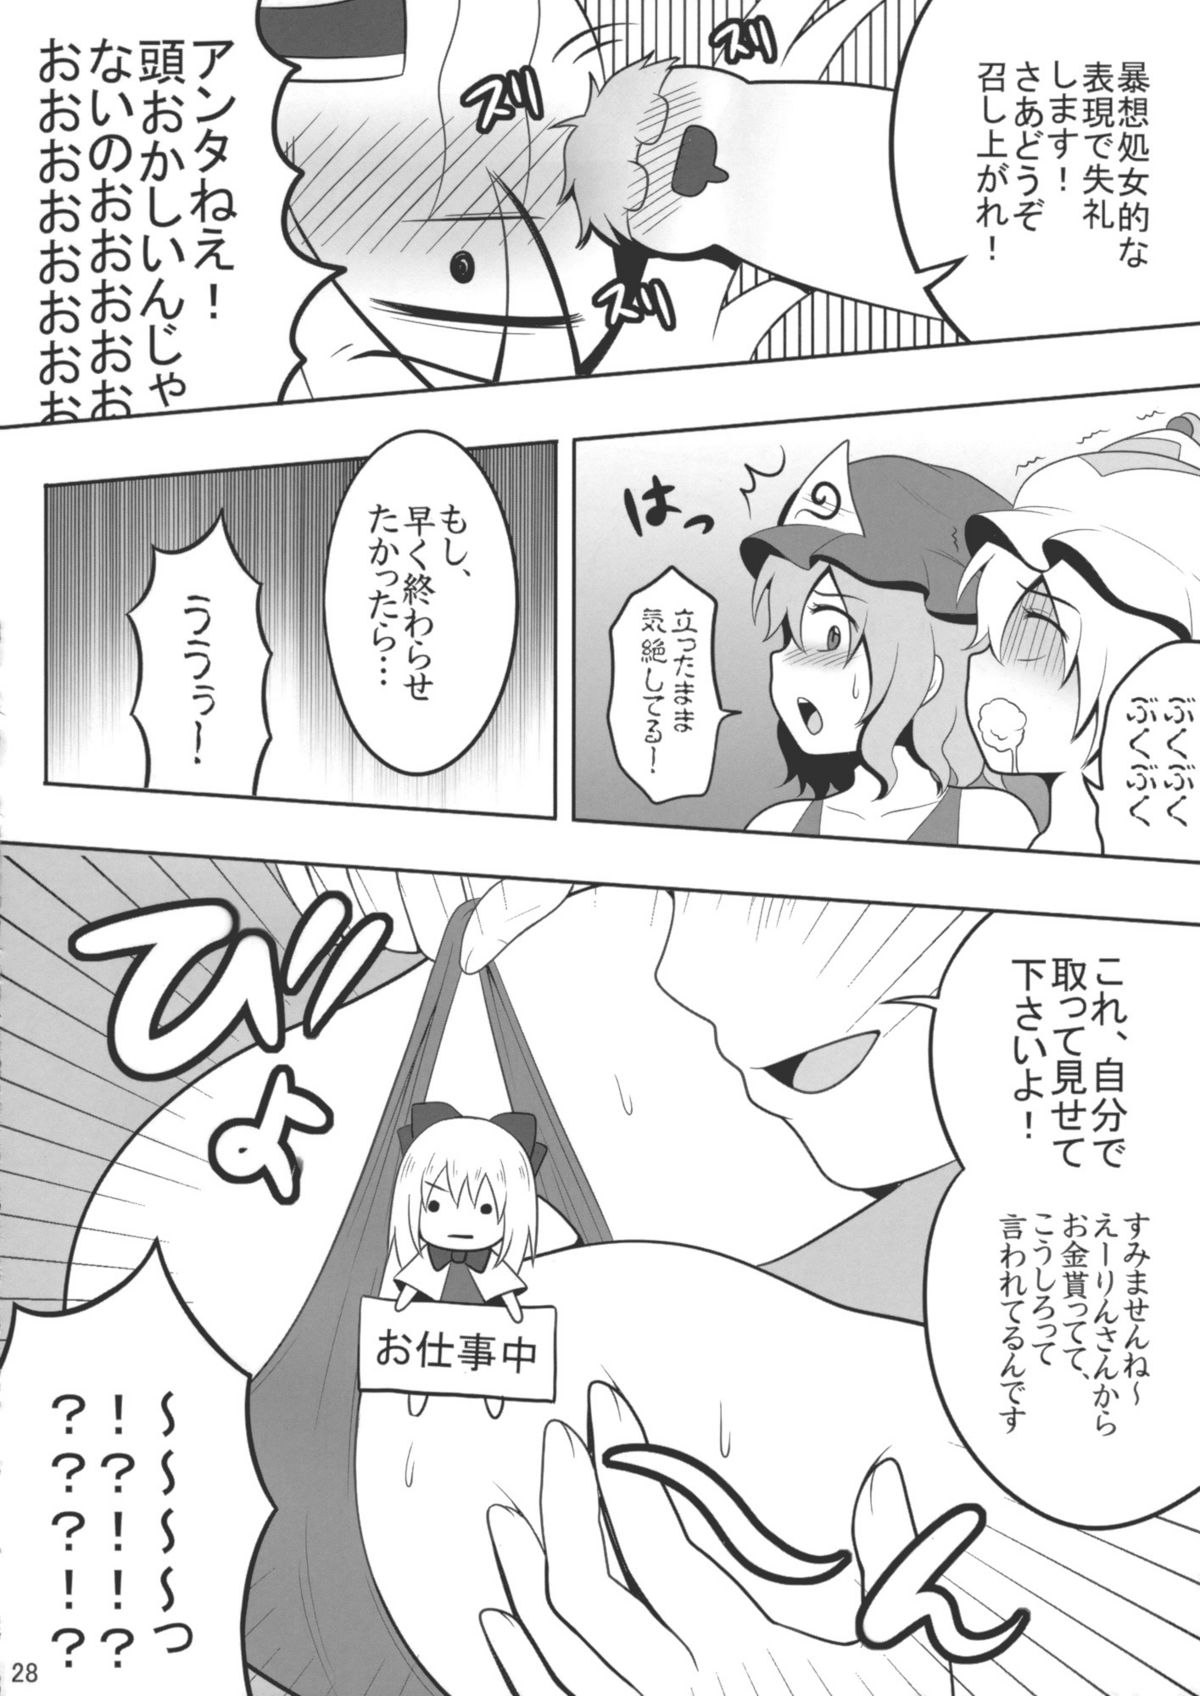 [Syounen Byoukan] Touhou Catfight 4 [少年病監] 東方キャットファイトIV